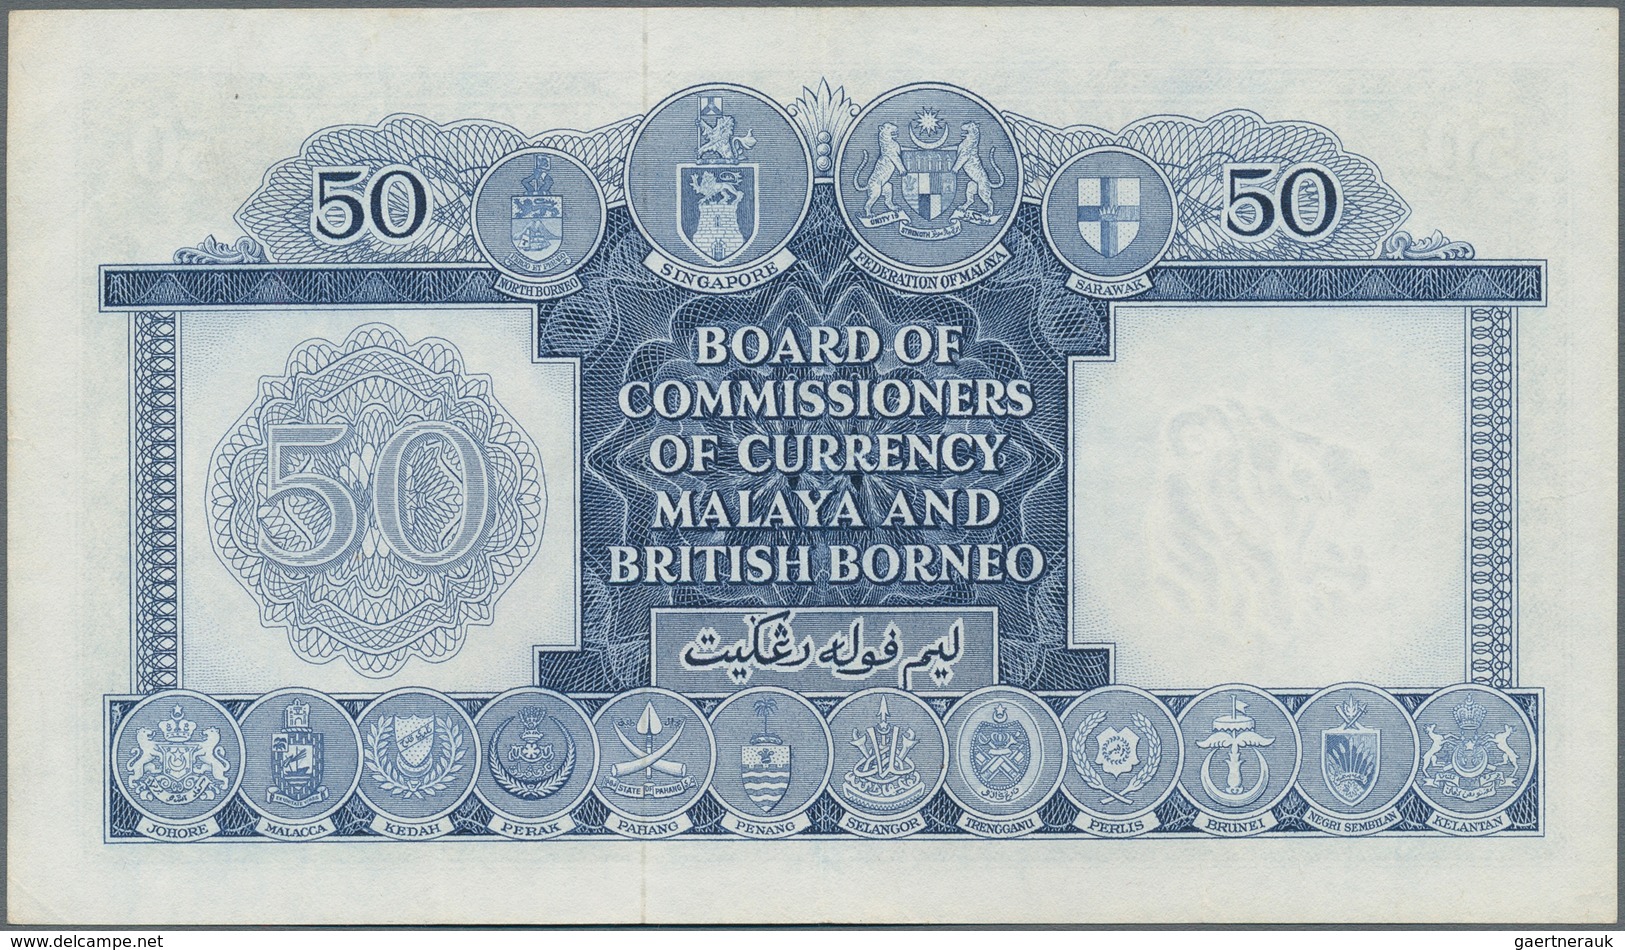 Malaya & British Borneo: Board Of Commissioners Of Currency 50 Dollars March 21st 1953, P.4, Almost - Malaysia